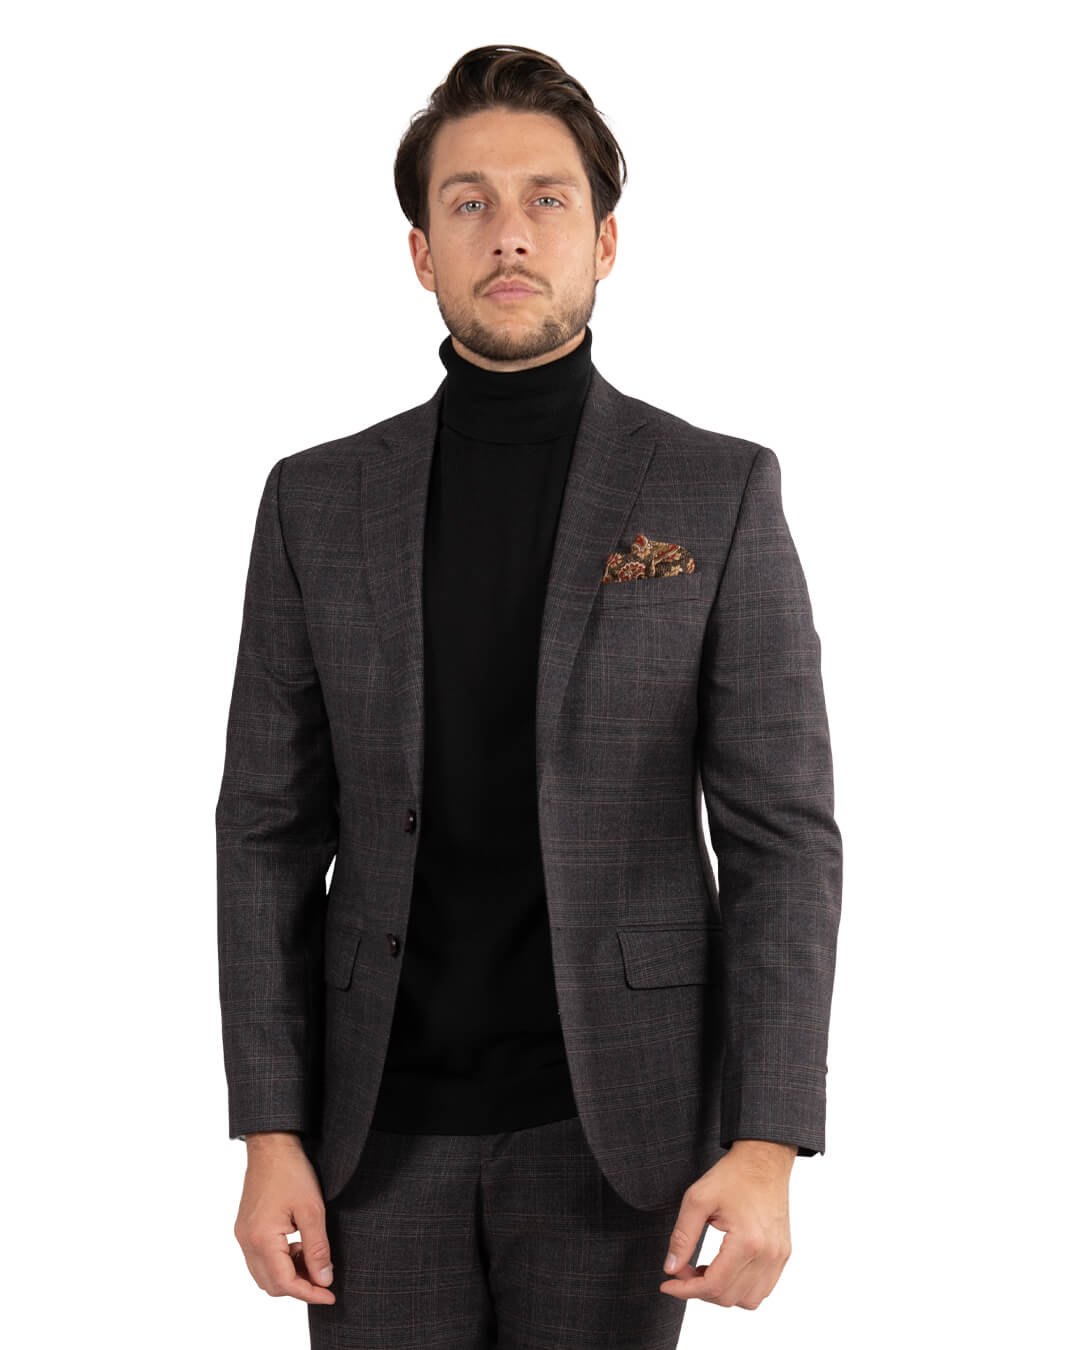 Grey And Brown Glen Check Suit